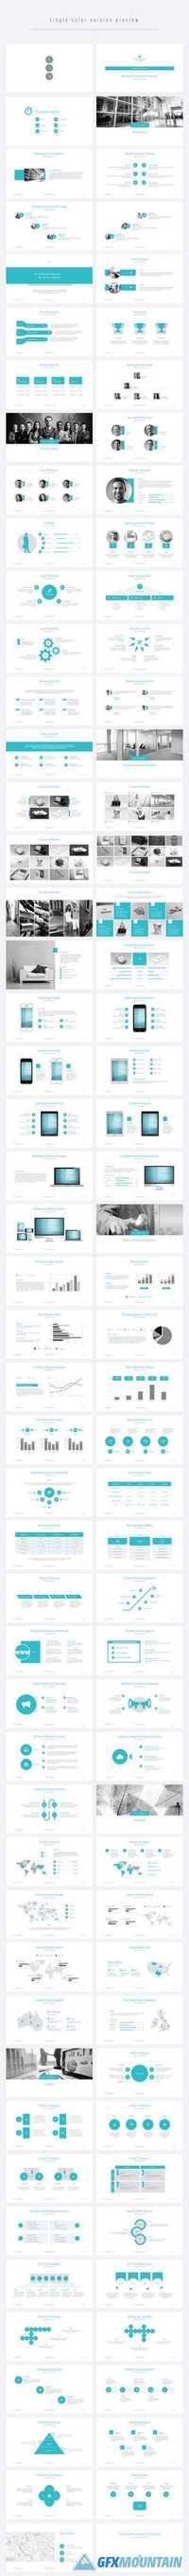 Amazing PowerPoint Template 368235